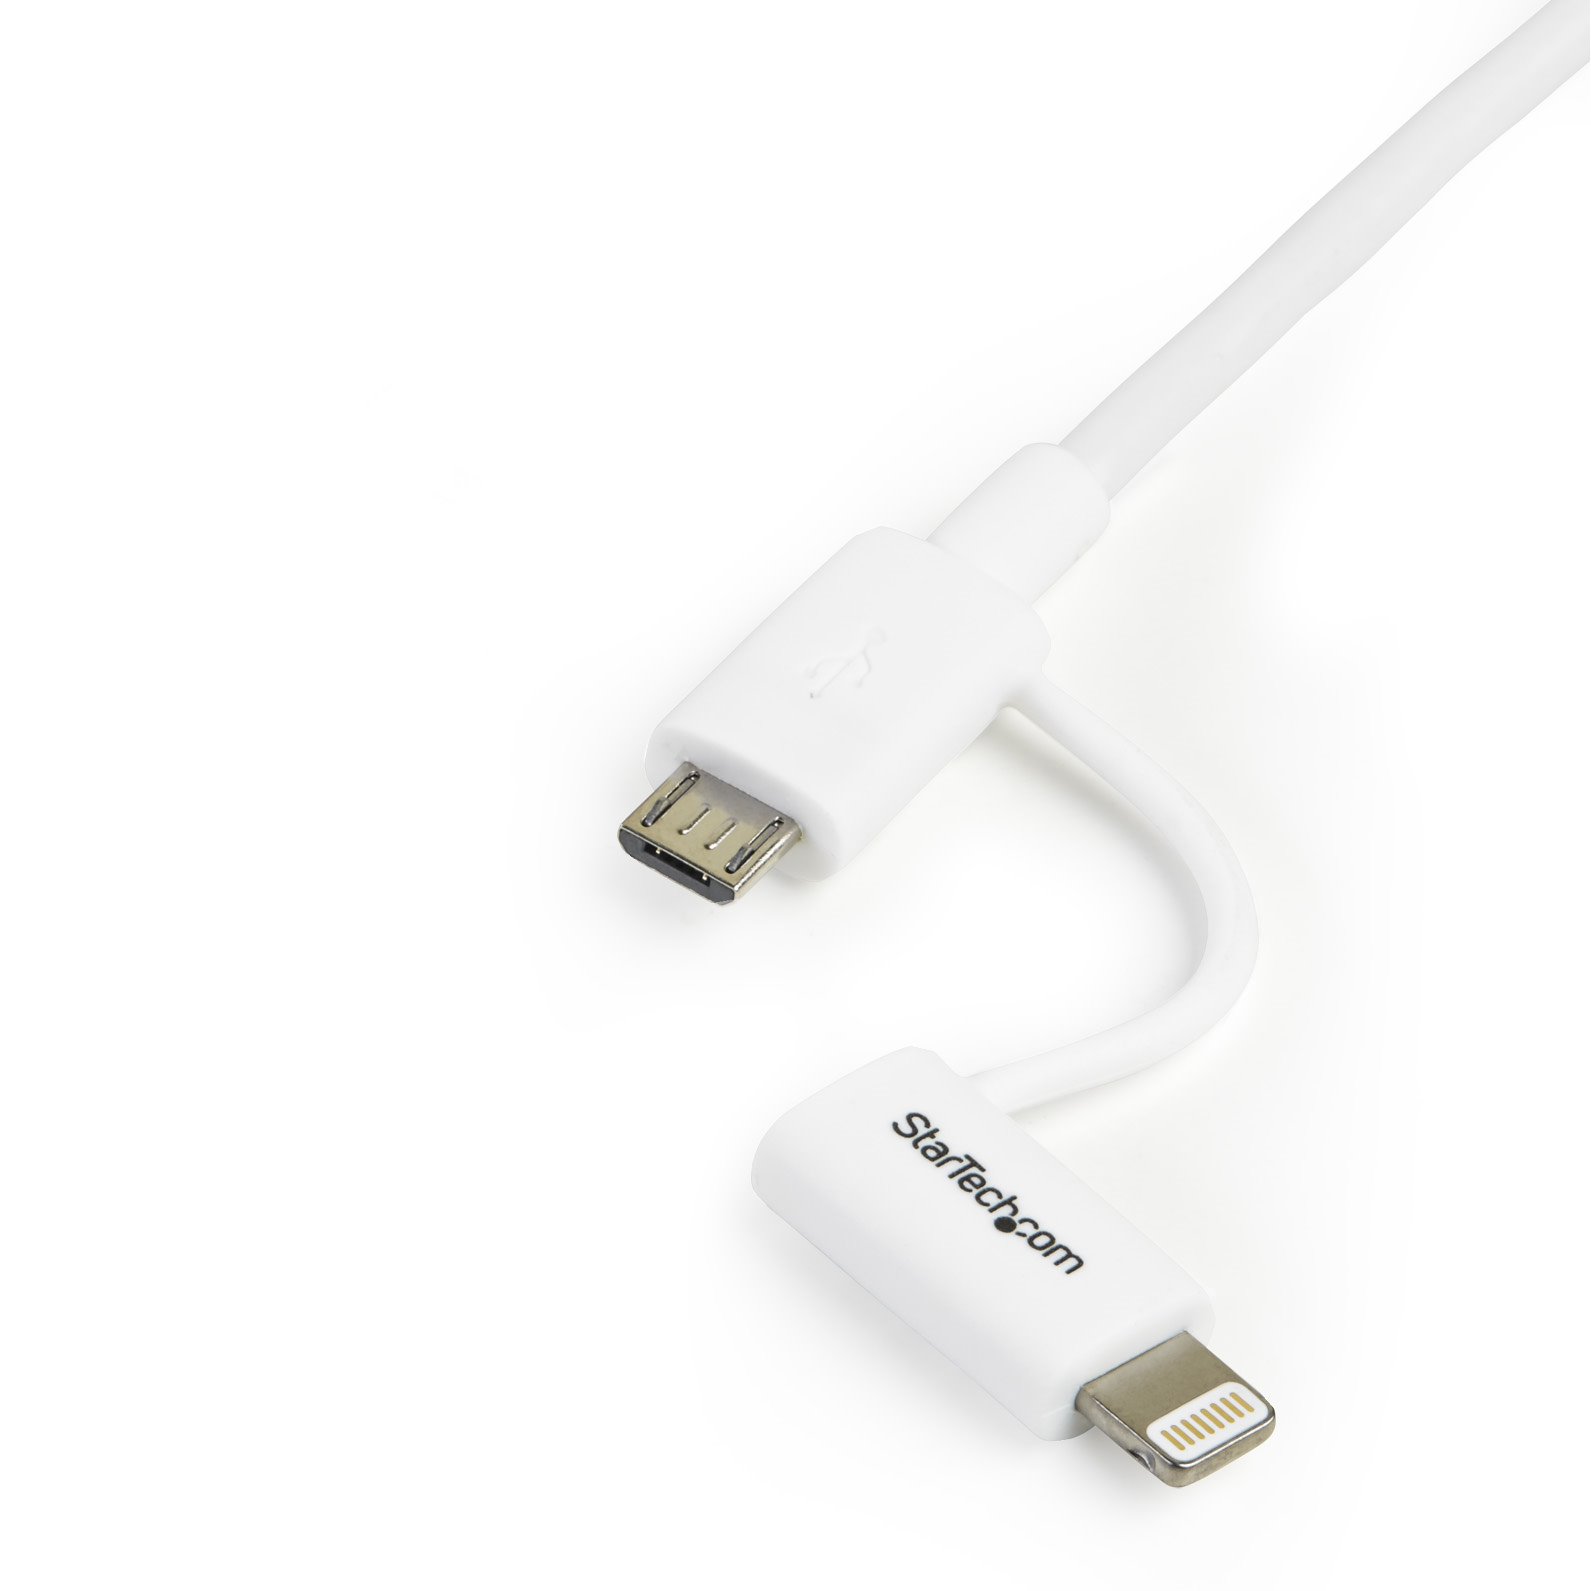 1m Lightning or Micro USB to USB Cable - Cables |